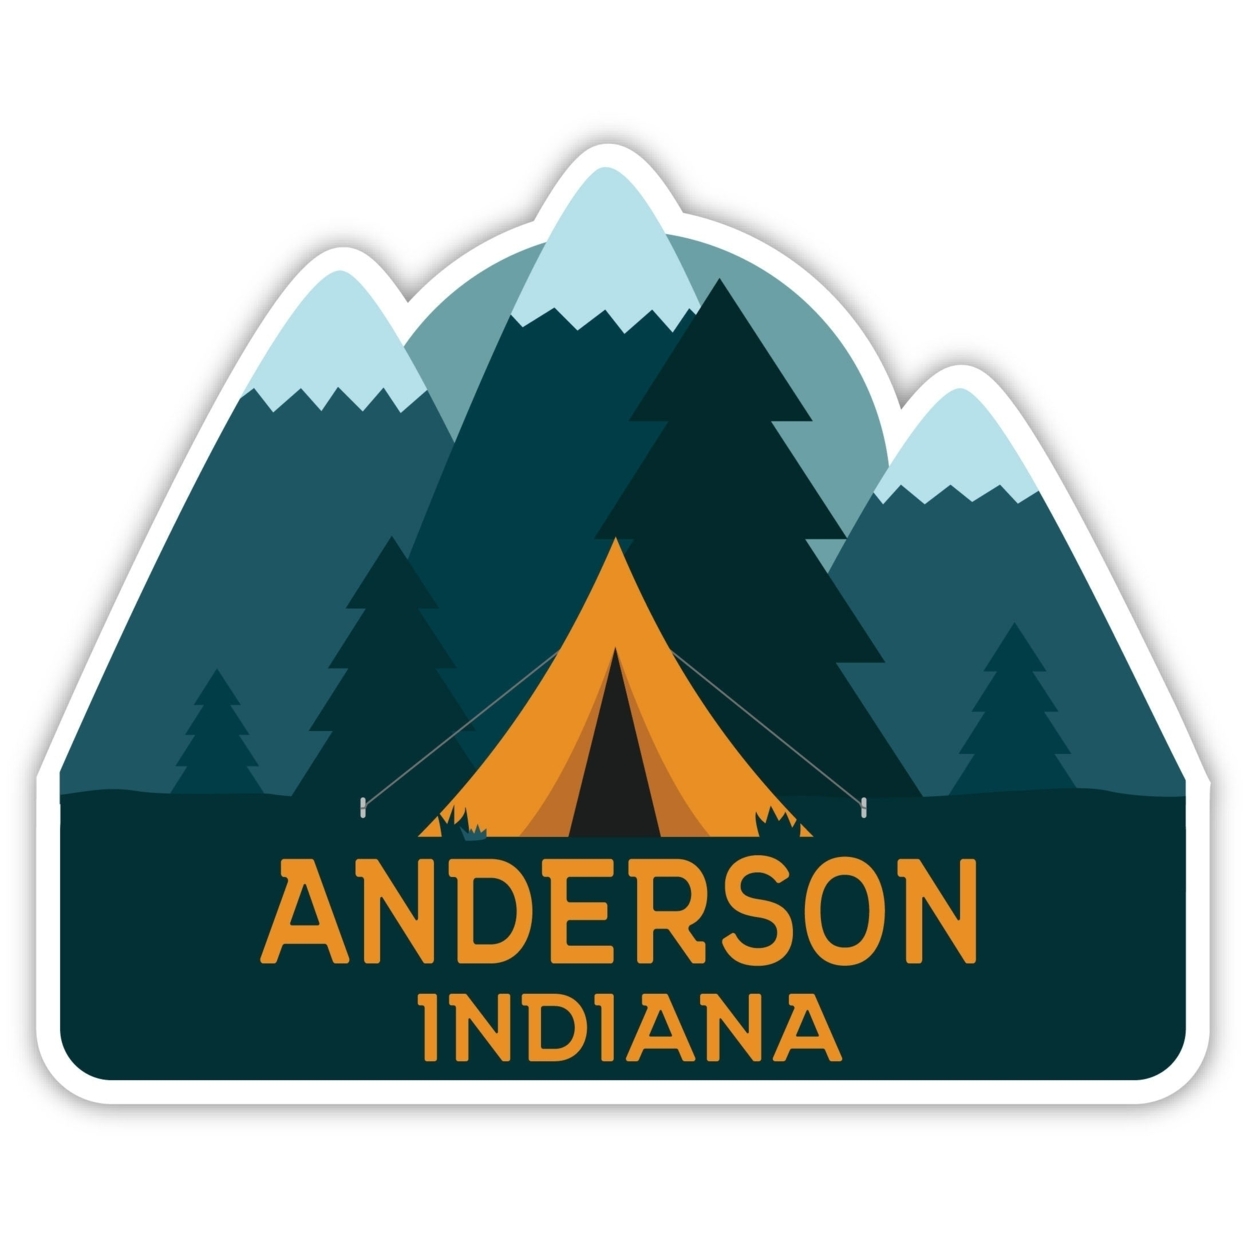 Anderson Indiana Souvenir Decorative Stickers (Choose Theme And Size) - Single Unit, 12-Inch, Tent